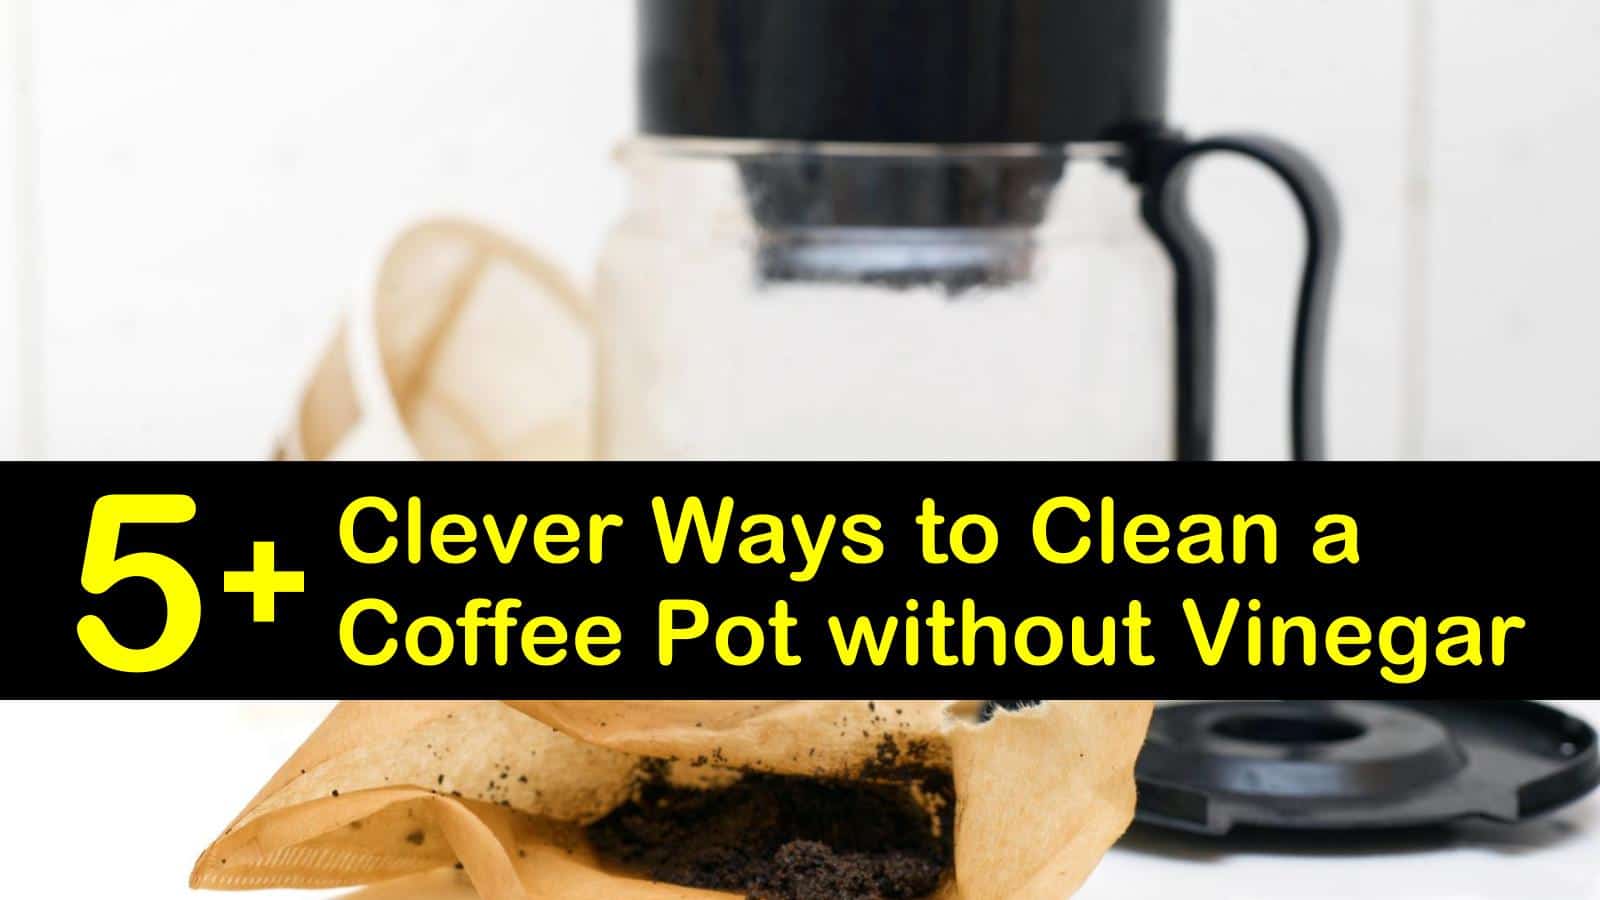 how to clean a coffee pot without vinegar titleimg1